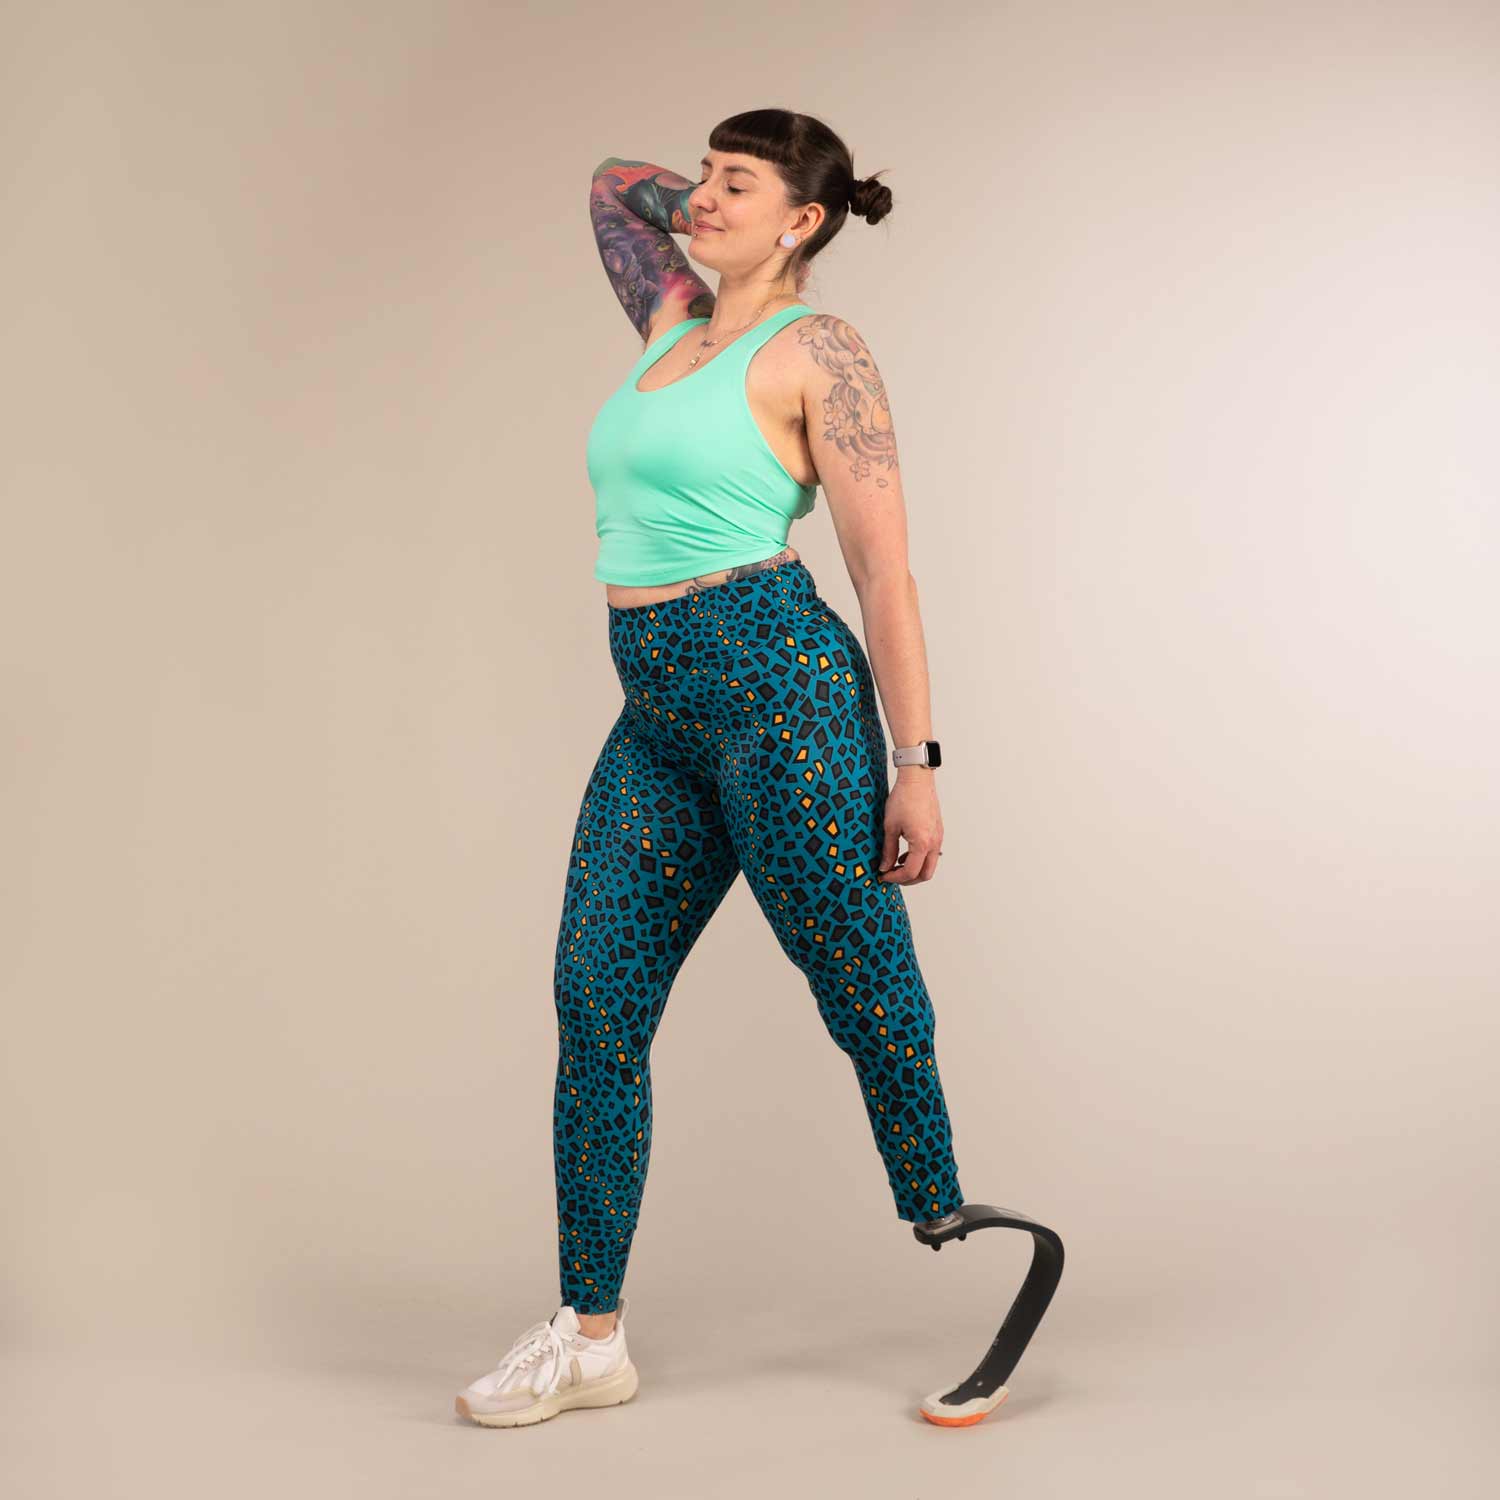 TITAN MINIMAL REPTILE | Printed Recycled Leggings | 3RD ROCK Clothing -  Laura is 5ft 6 with a 31.5" waist, 43" hips and wears a size 14 F